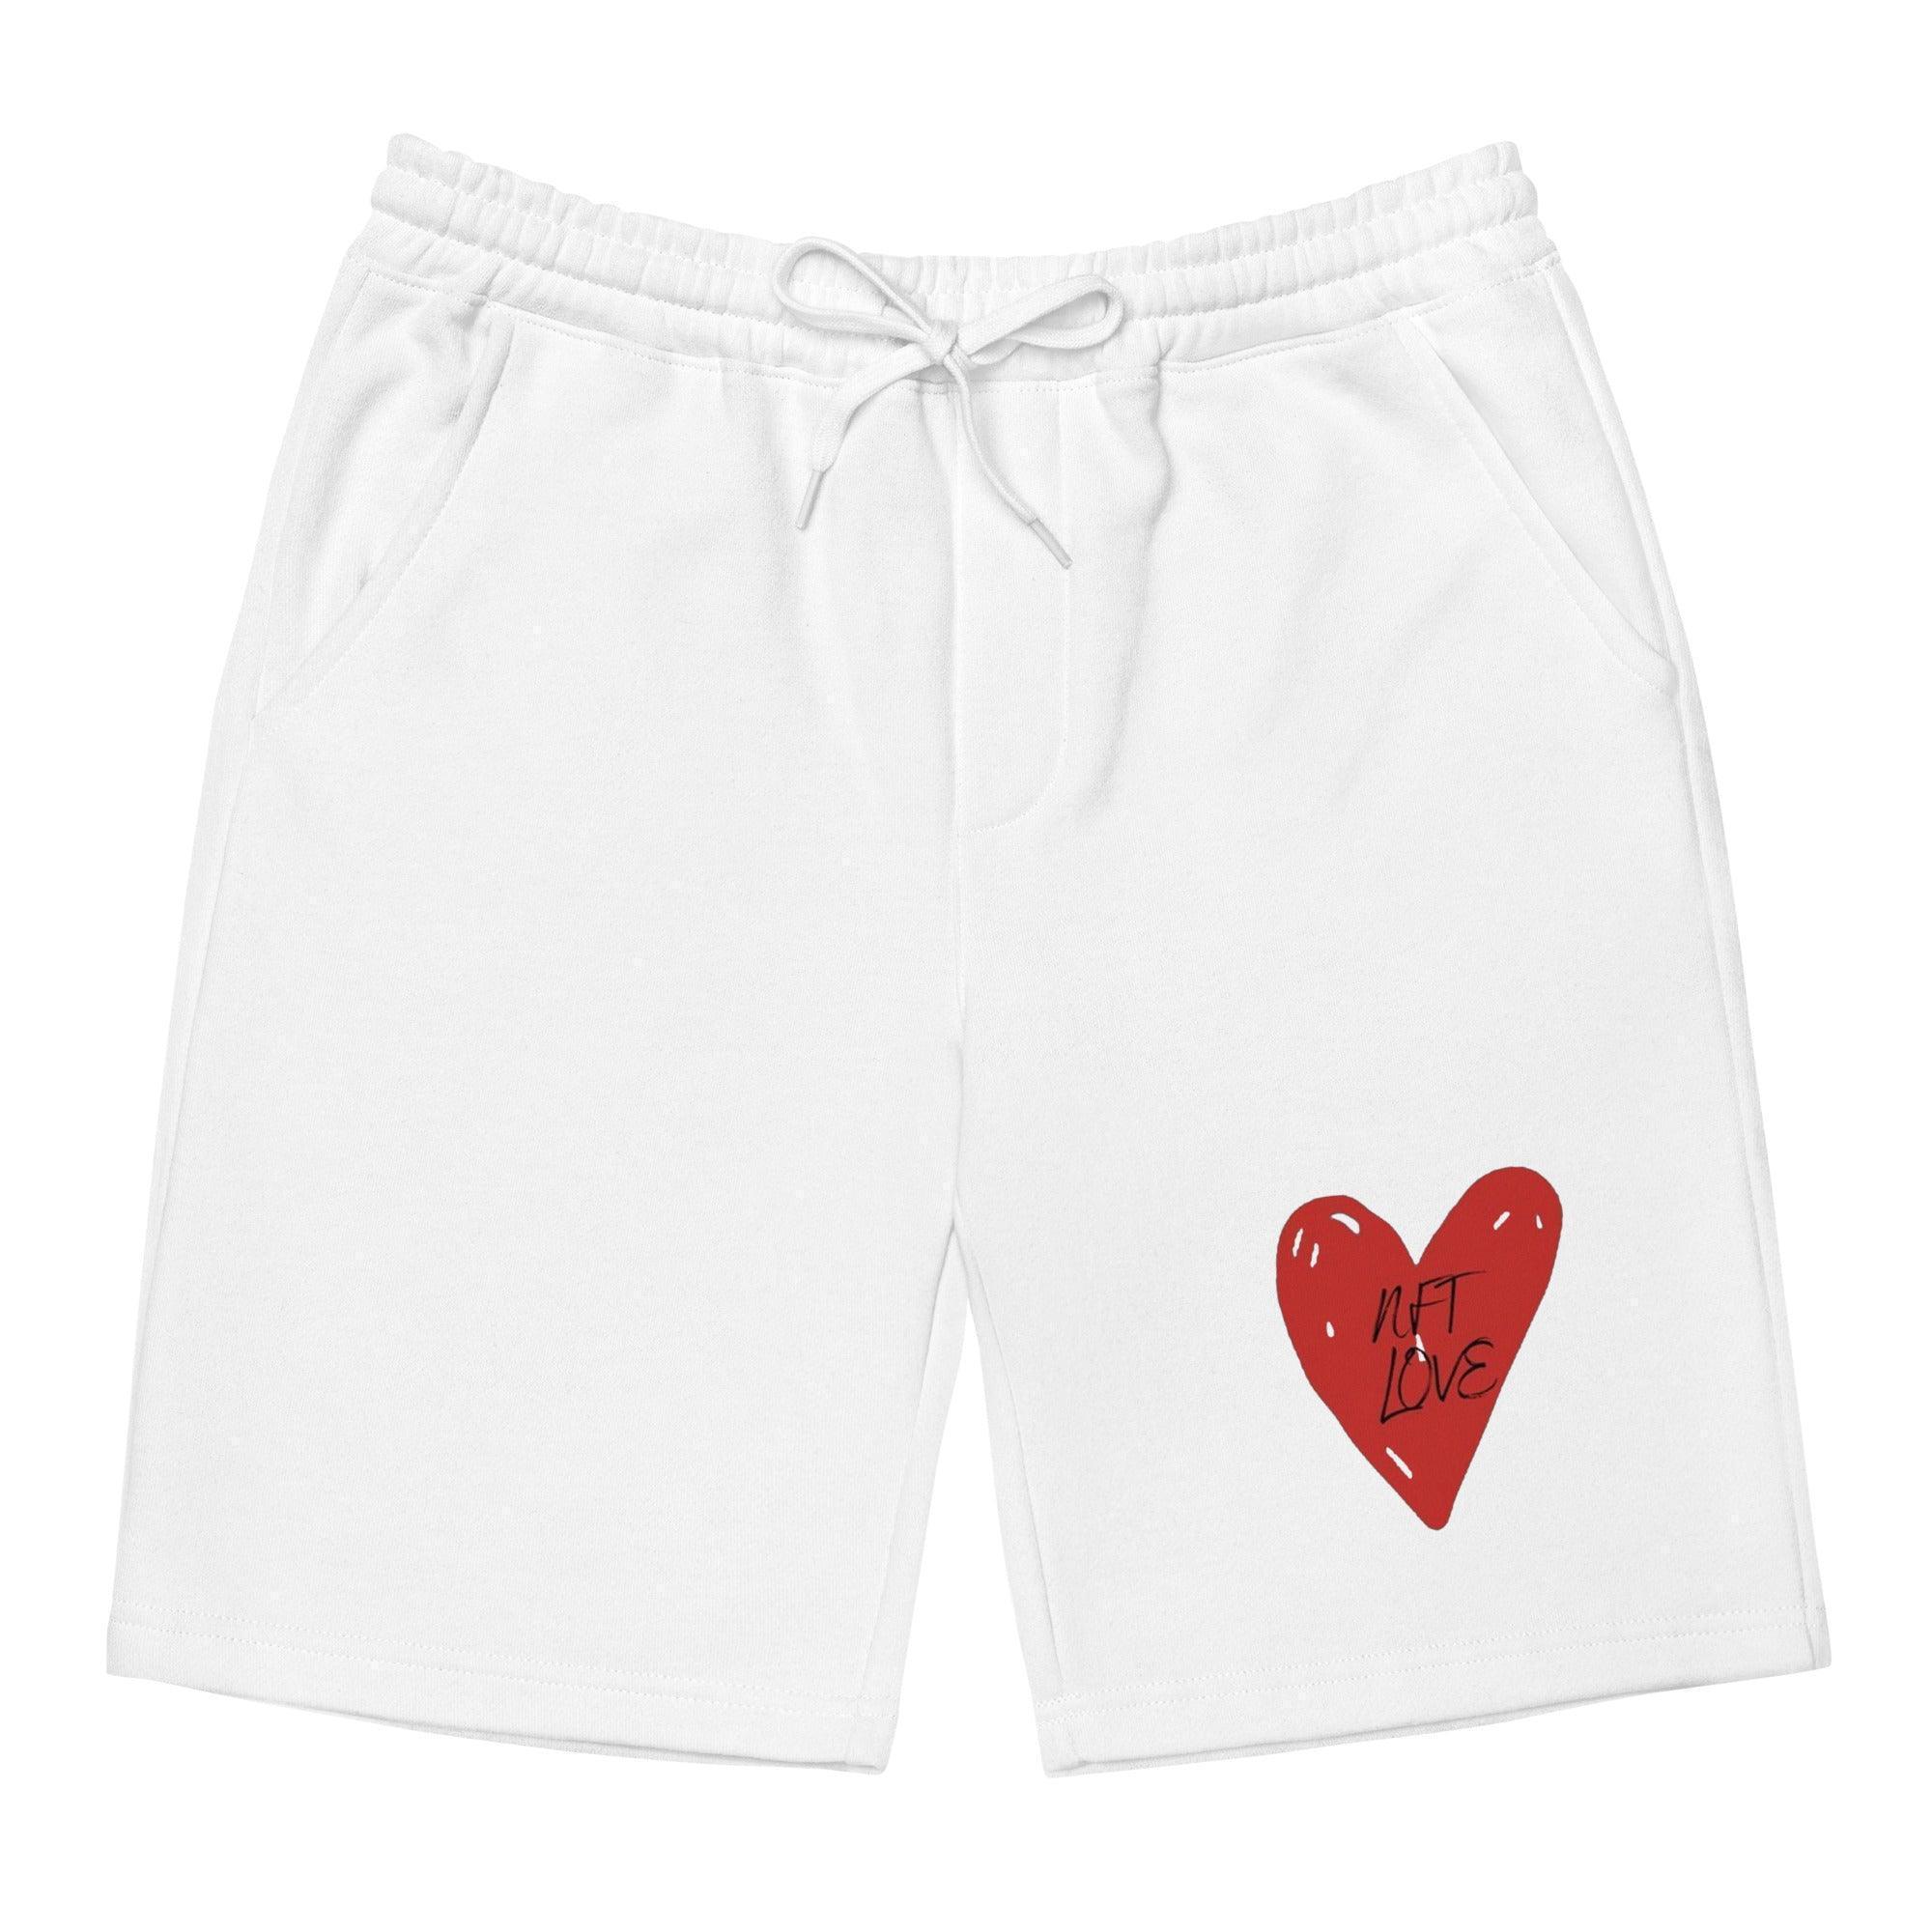 Proud NFT Lover Shorts - InvestmenTees